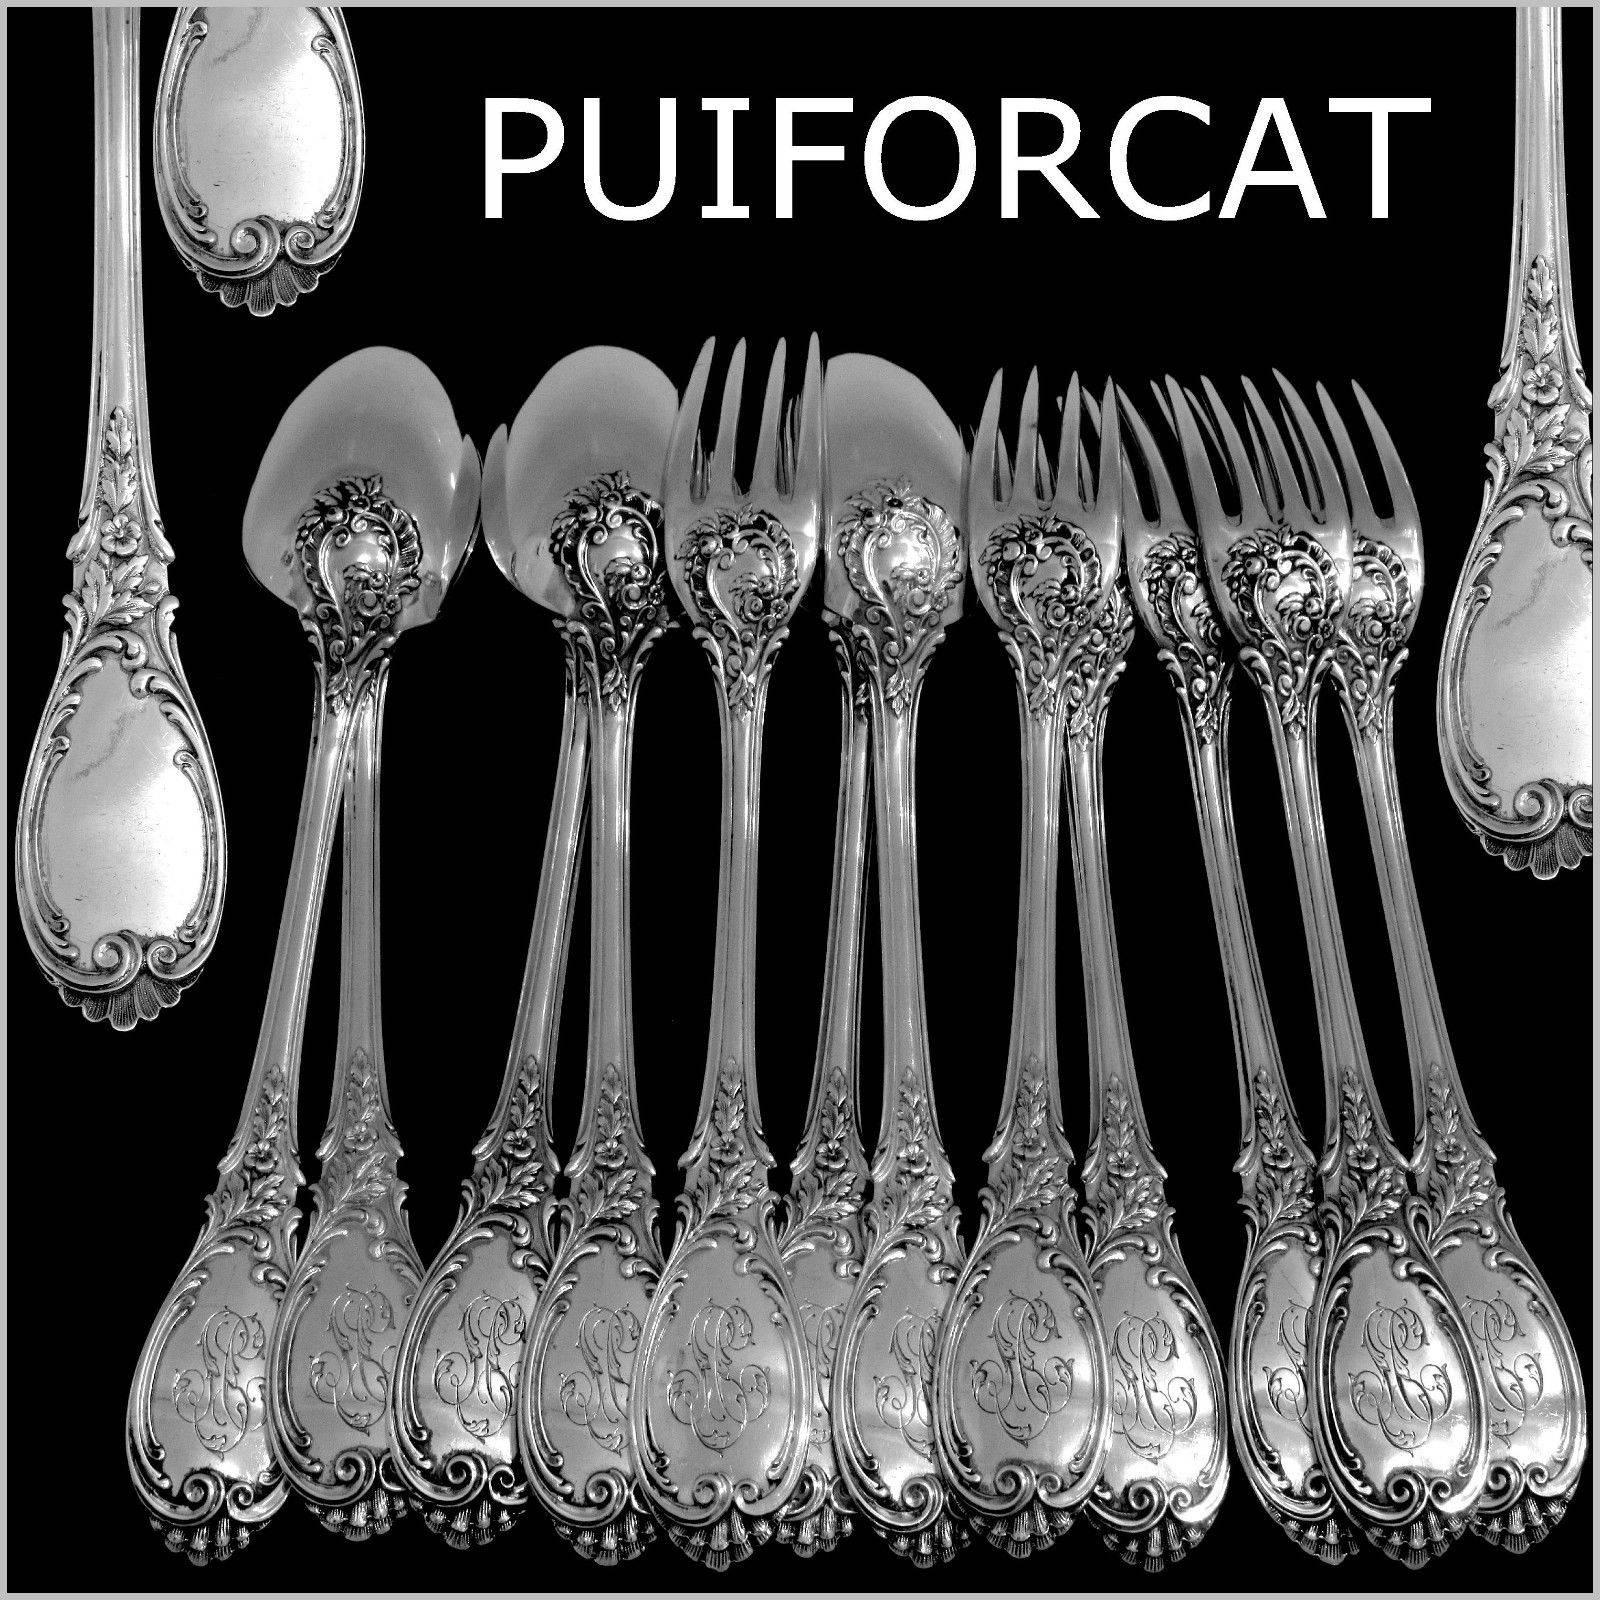 Handles have Rococo decoration with a sophisticated foliage decoration. This model is called : Roses n°45 in catalog Puiforcat. Once again, the Maison Puiforcat shows that it is one of the most prestigious silversmith of the world. Undoubtedly